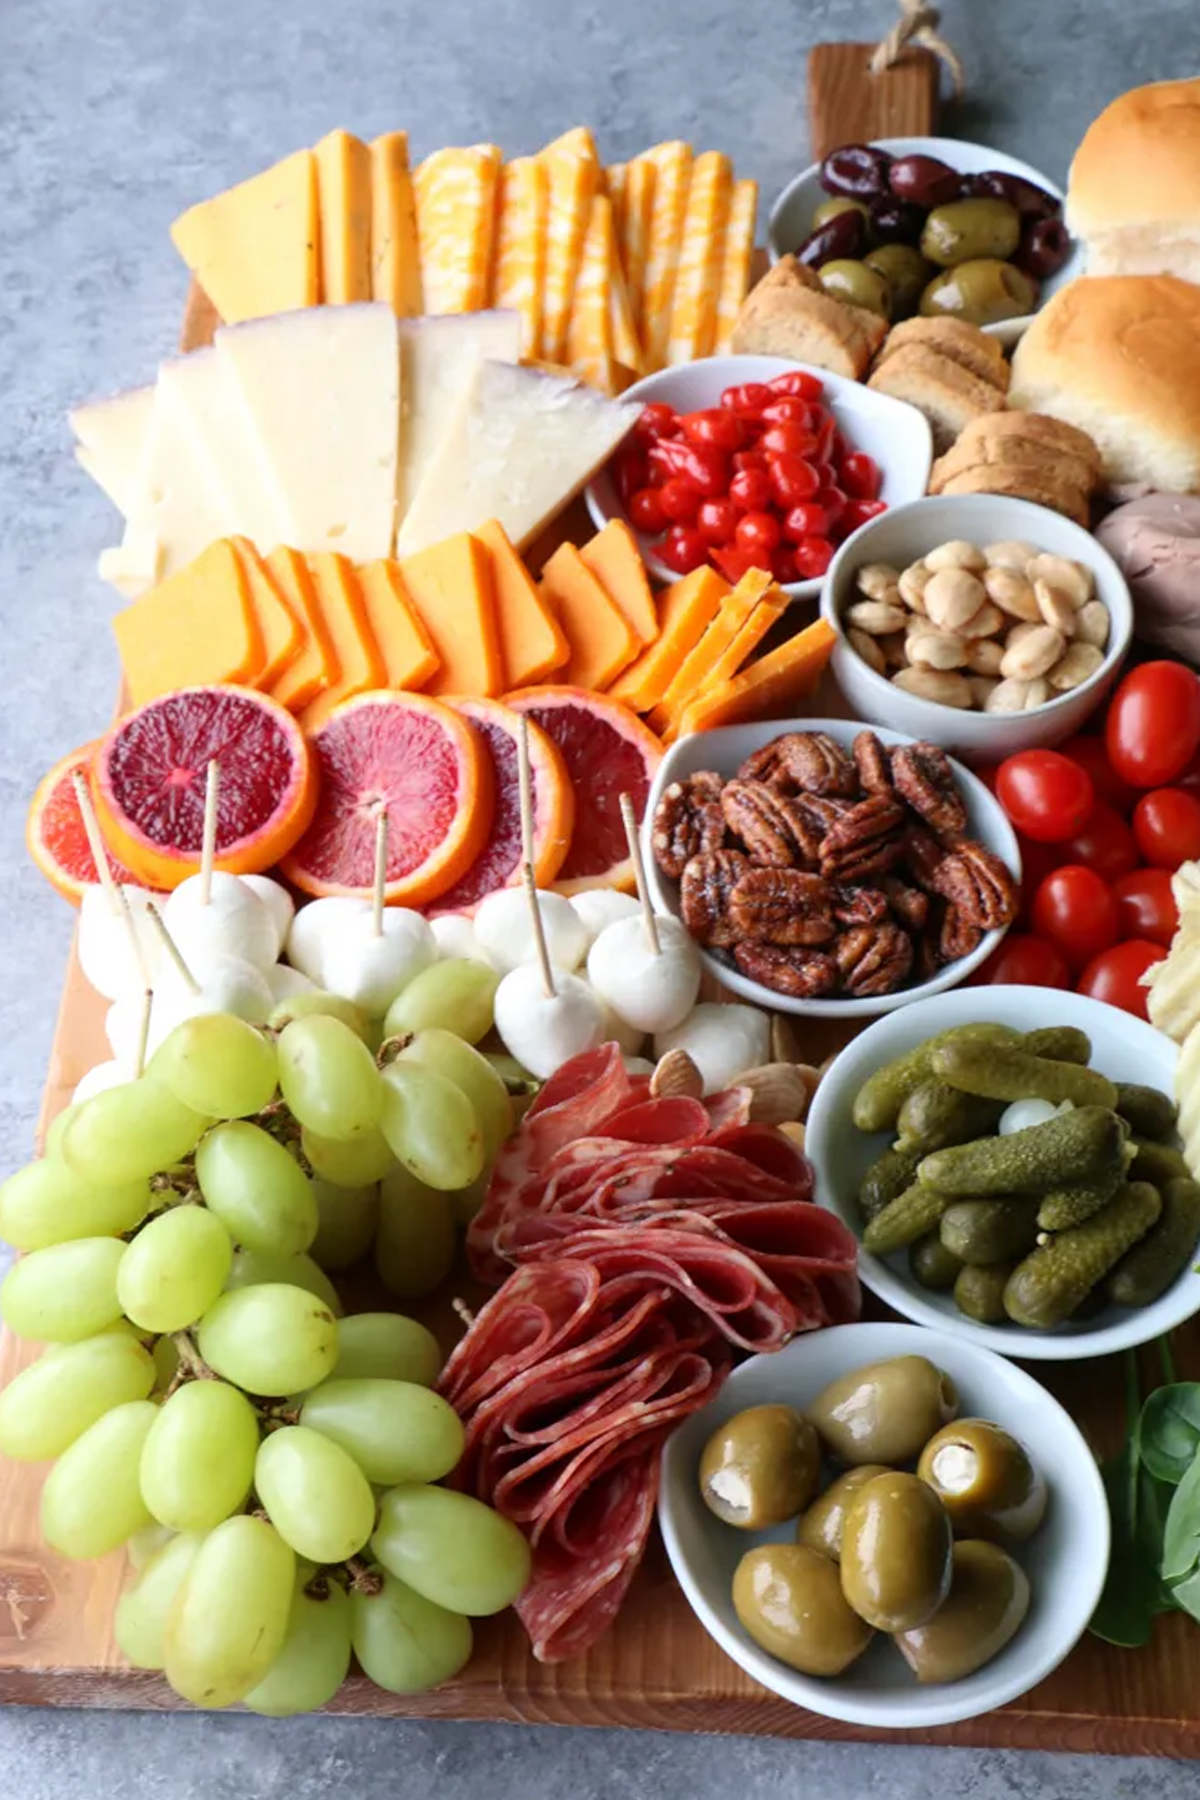 Cheese, meats, olives, buns, nuts, pickles, grapes, and tomatoes fill Hip Foodie Mom's charcuterie board.